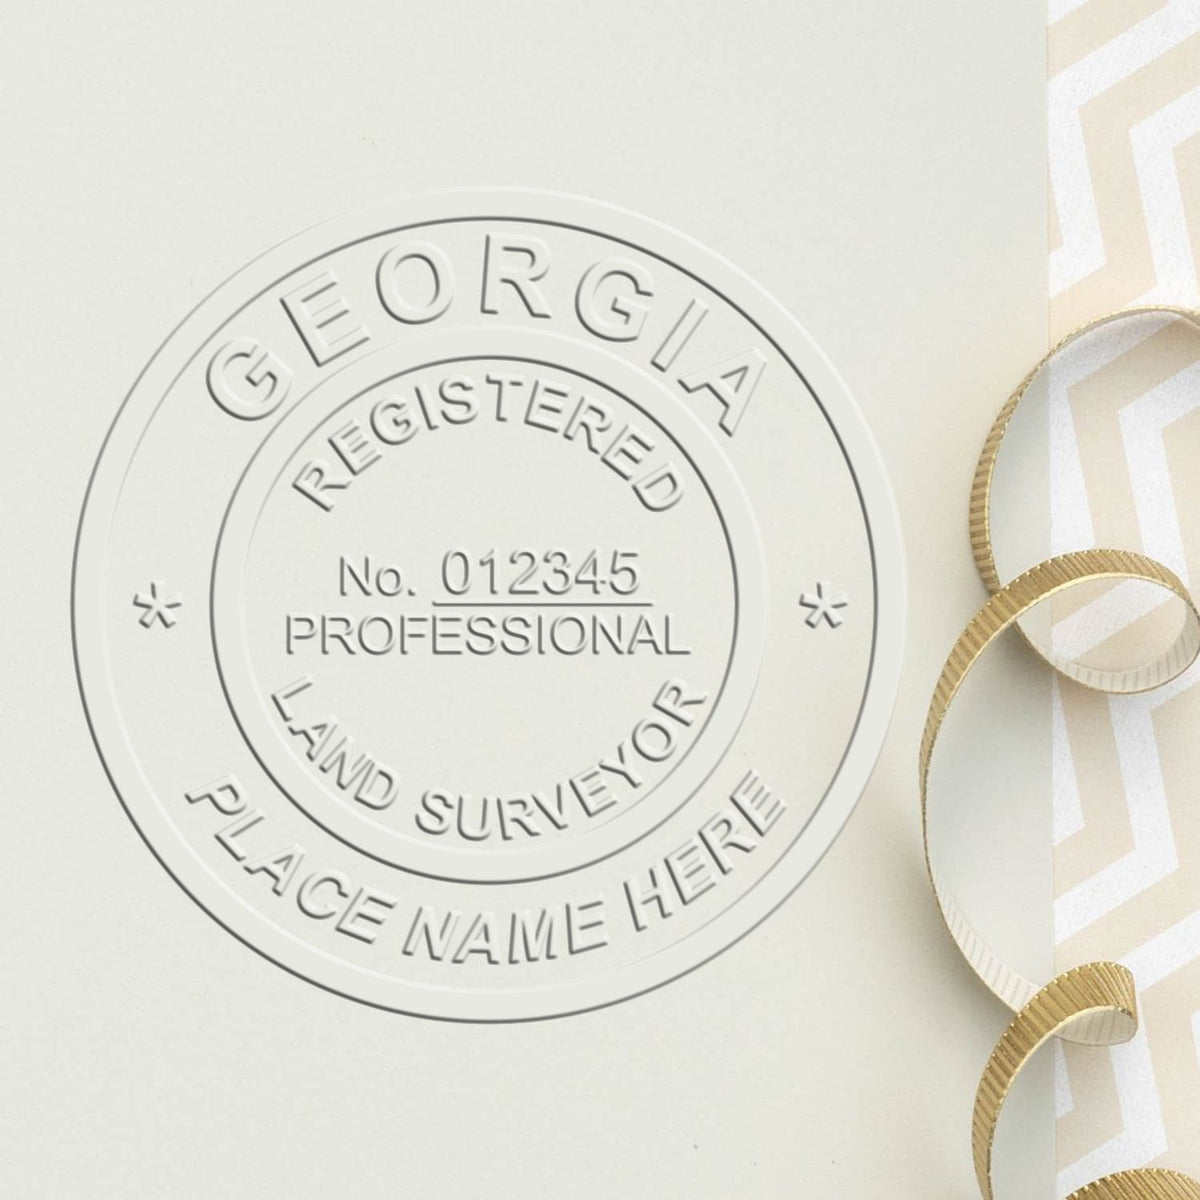 A photograph of the Hybrid Georgia Land Surveyor Seal stamp impression reveals a vivid, professional image of the on paper.